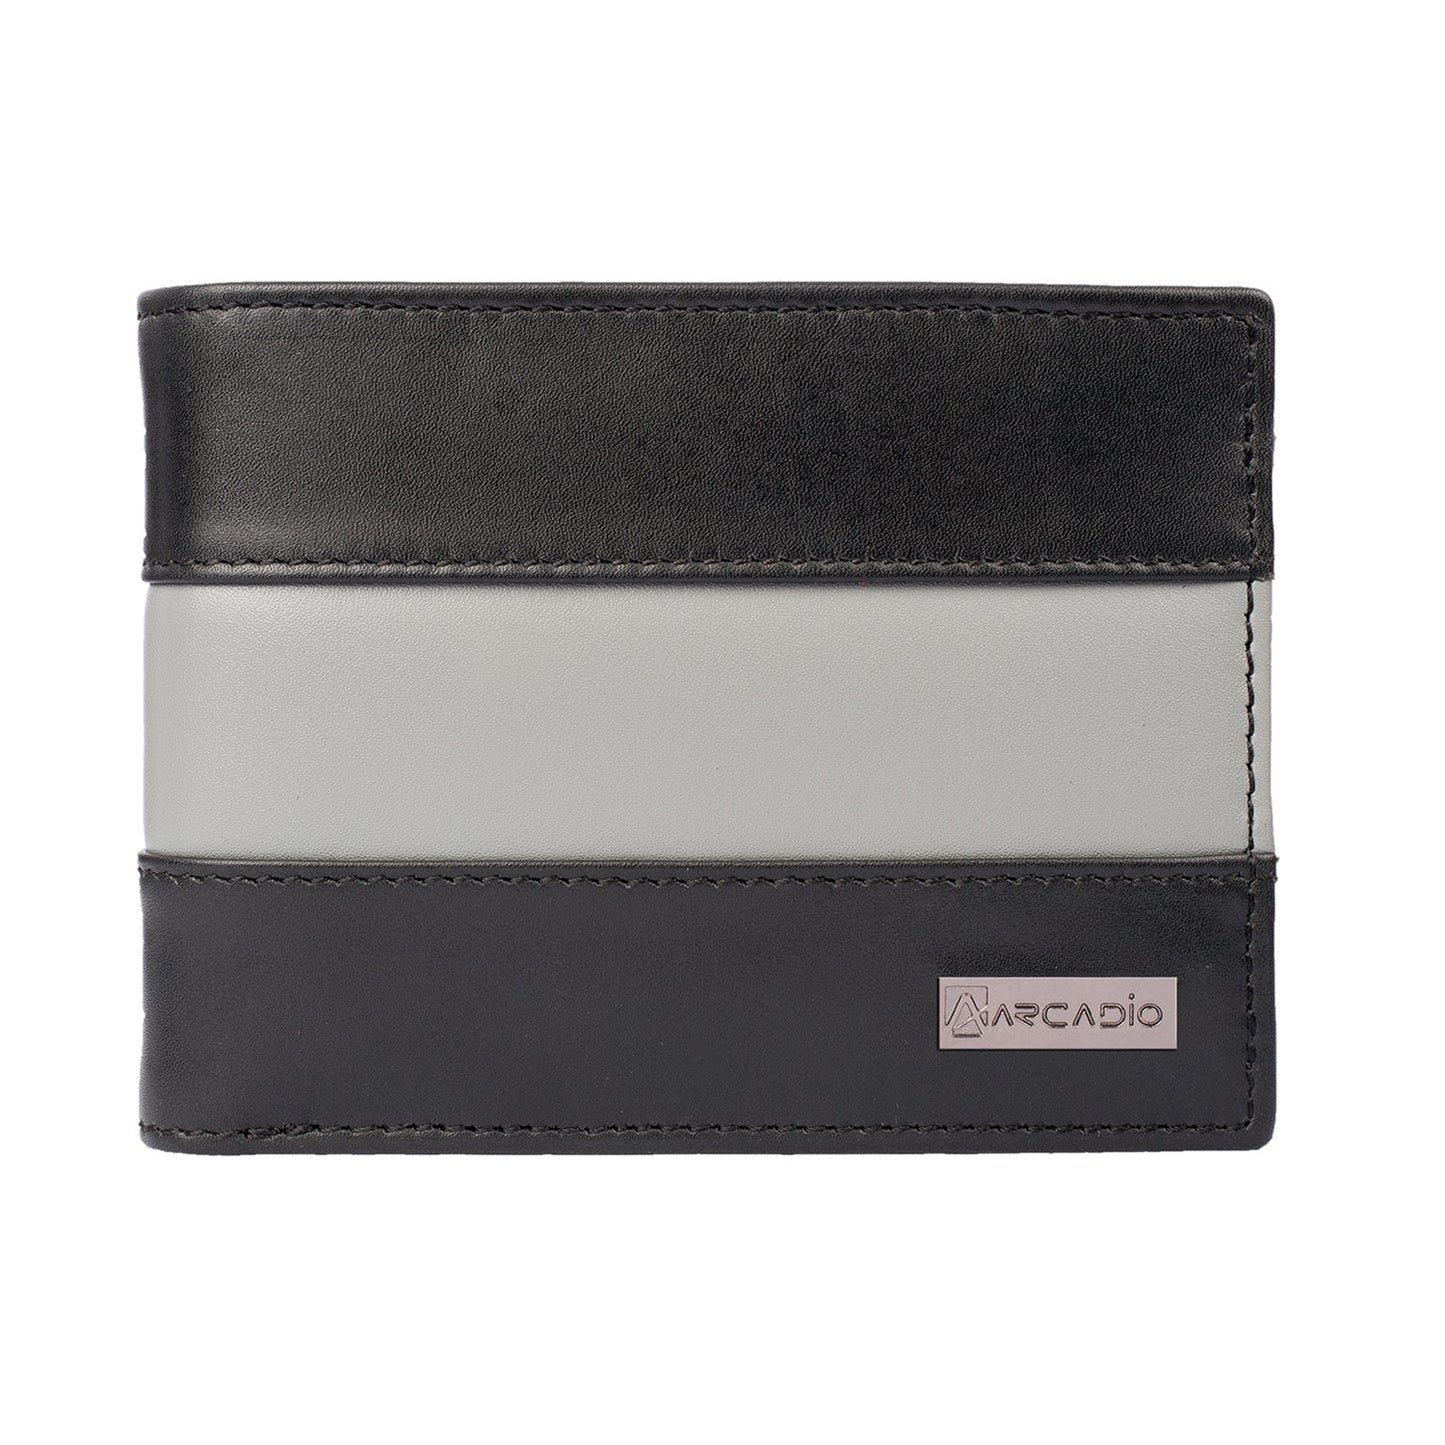 TWO MUCH Dual Toned Leather Wallet ARW1004BK ARCADIO